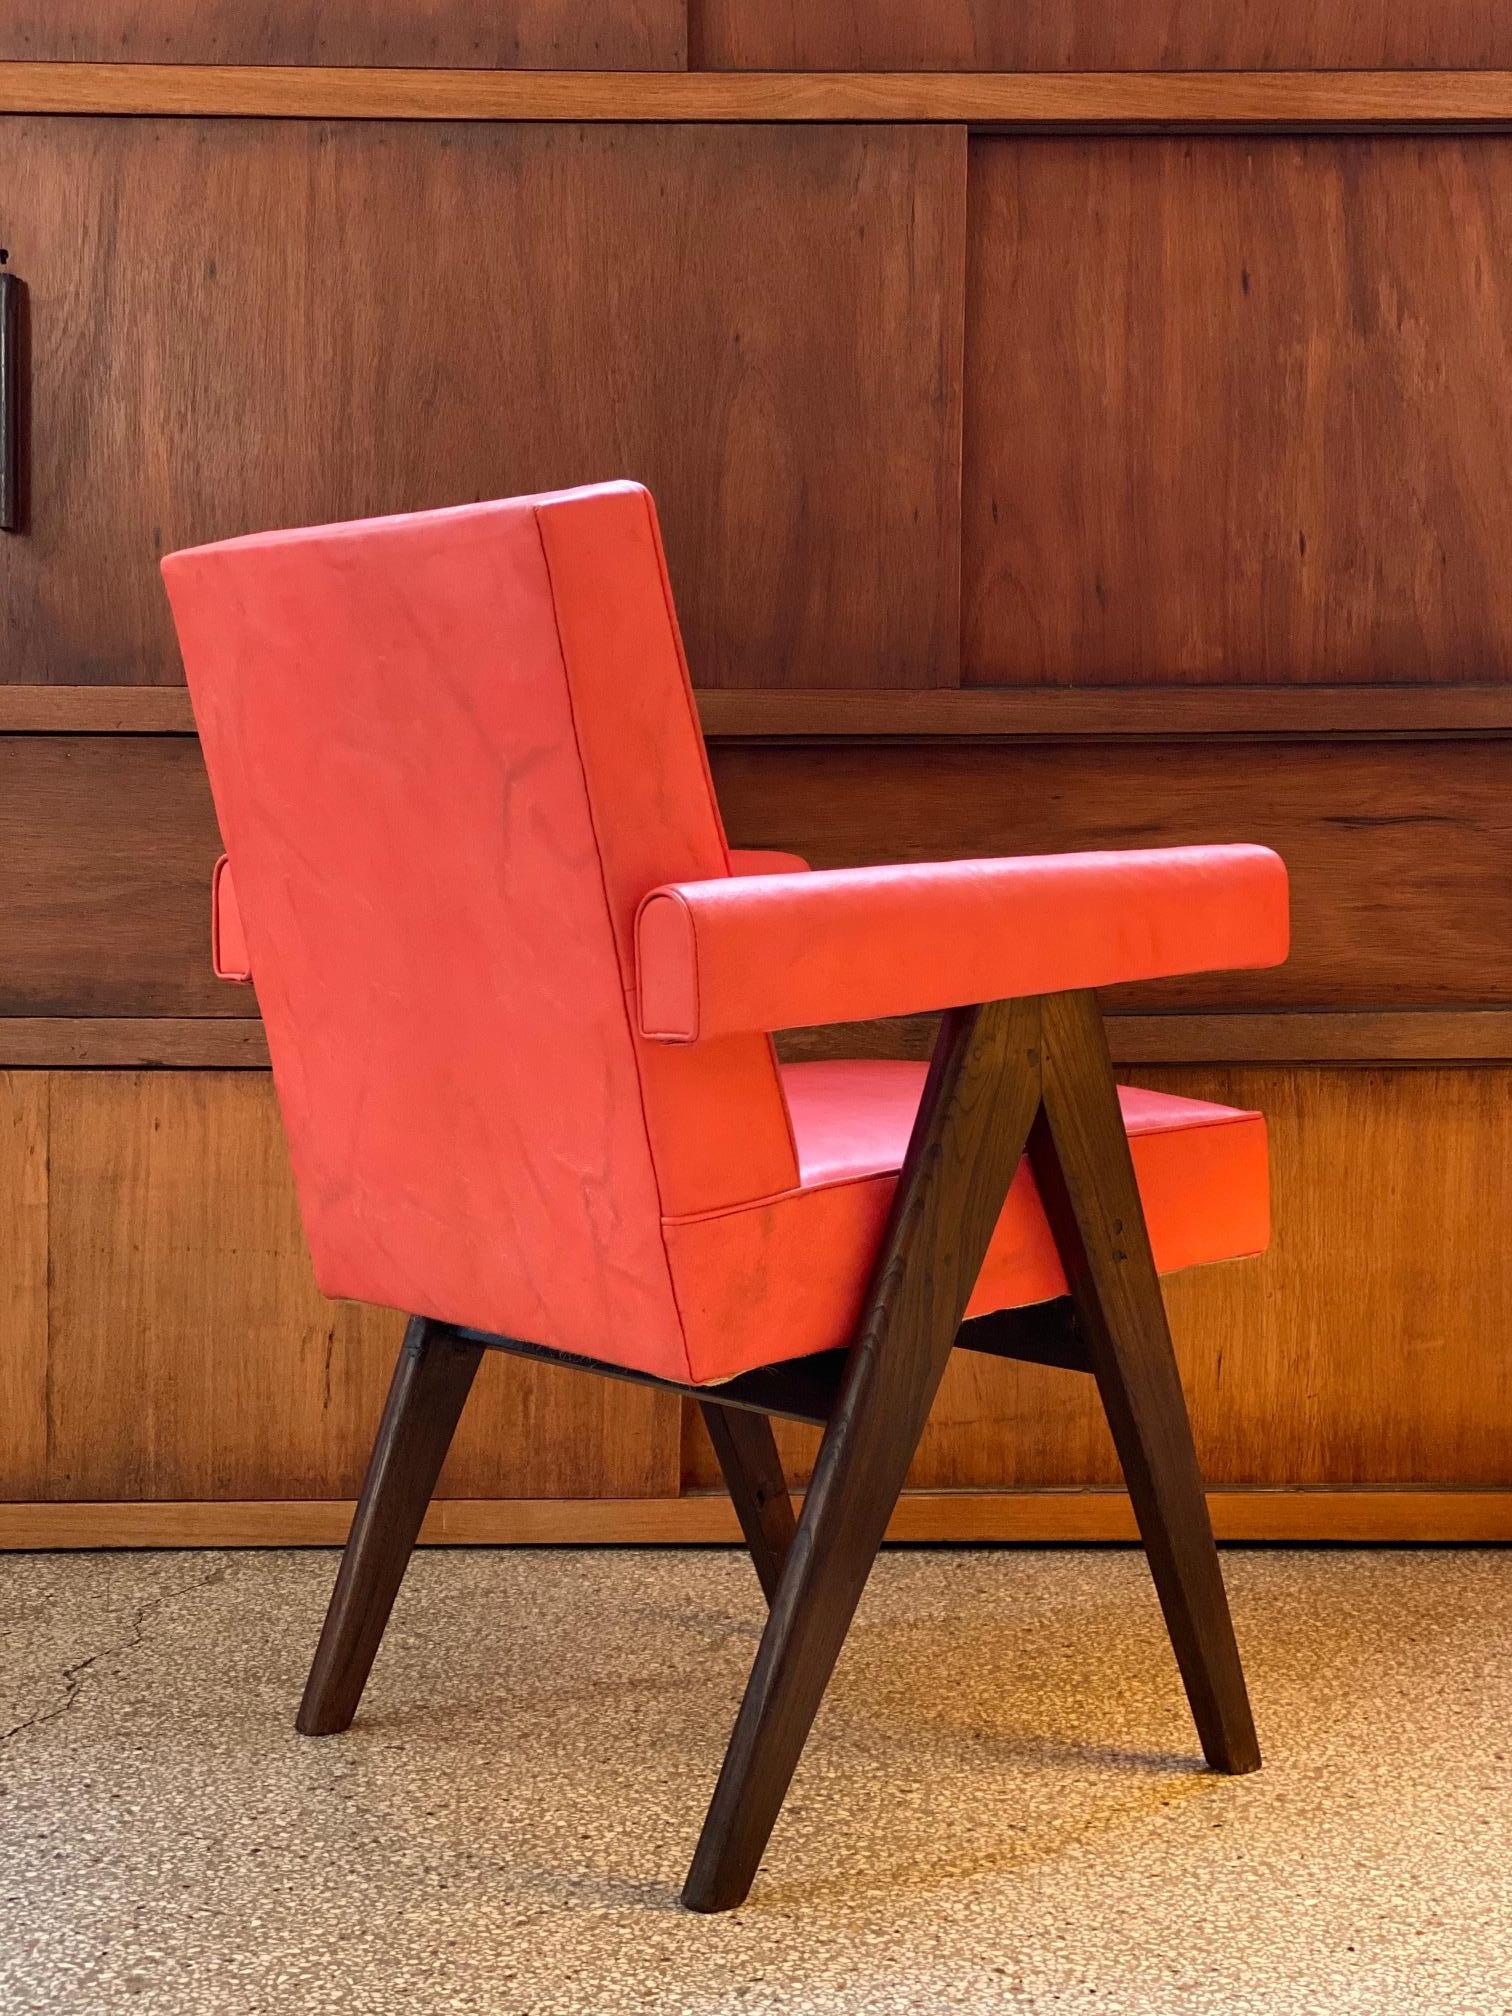 Pierre Jeanneret
PJ-SI-30-A
Committee armchair, circa 1955.
Solid teak. Leather.
Various administrative buildings. Chandigarh, India
Important: Vintage collector's item for sale with guaranteed authenticity. 

Bibliography:
Eric Touchaleaume